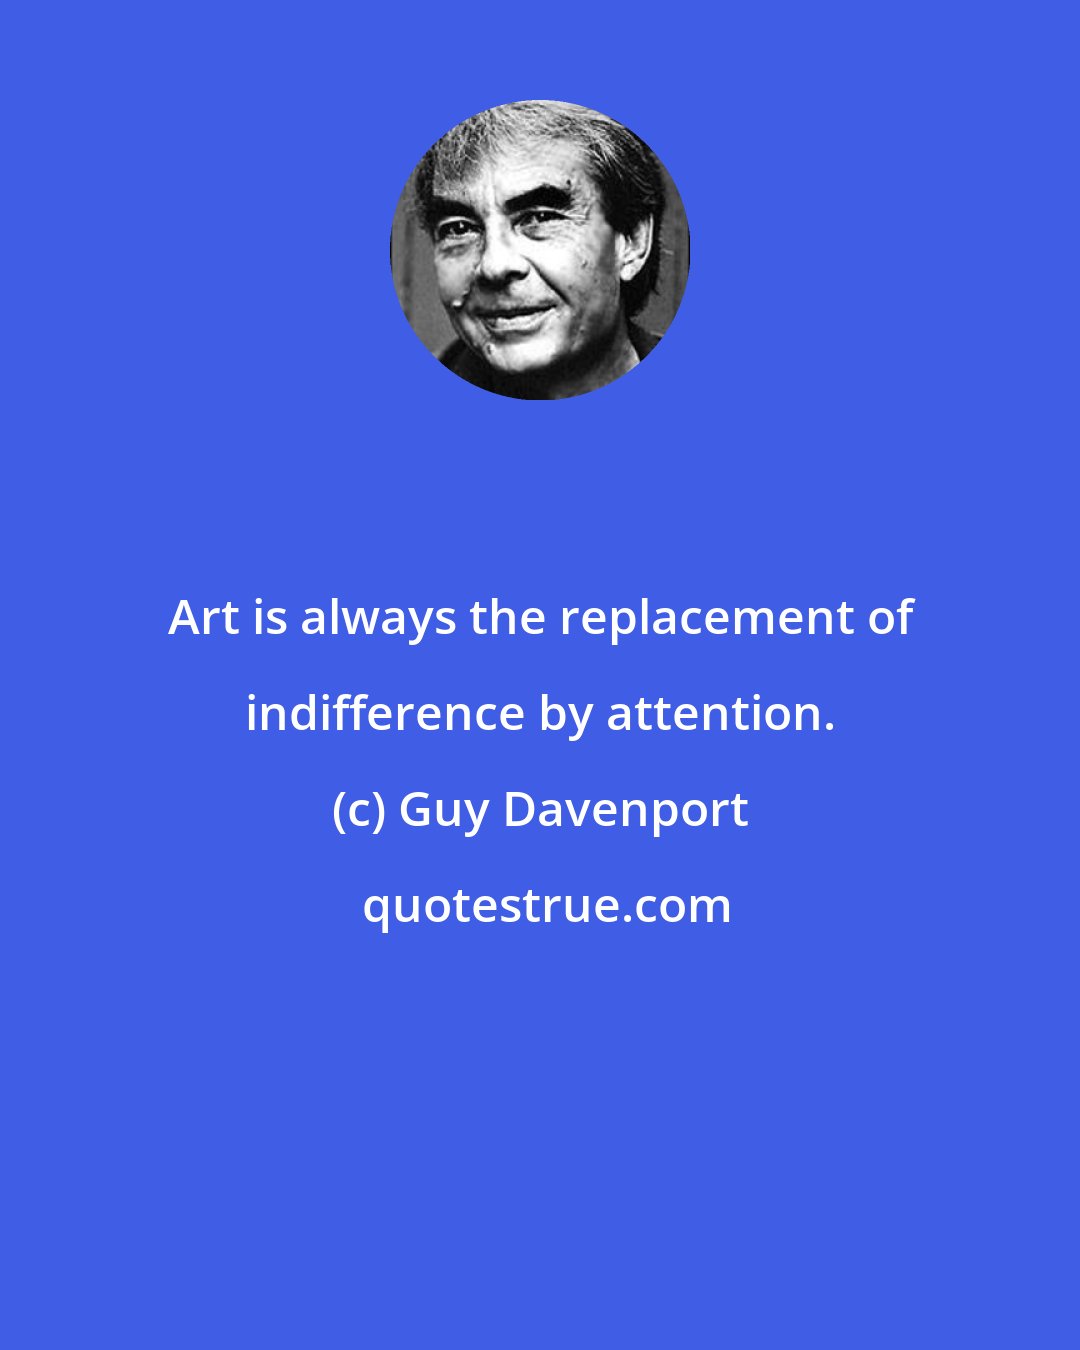 Guy Davenport: Art is always the replacement of indifference by attention.